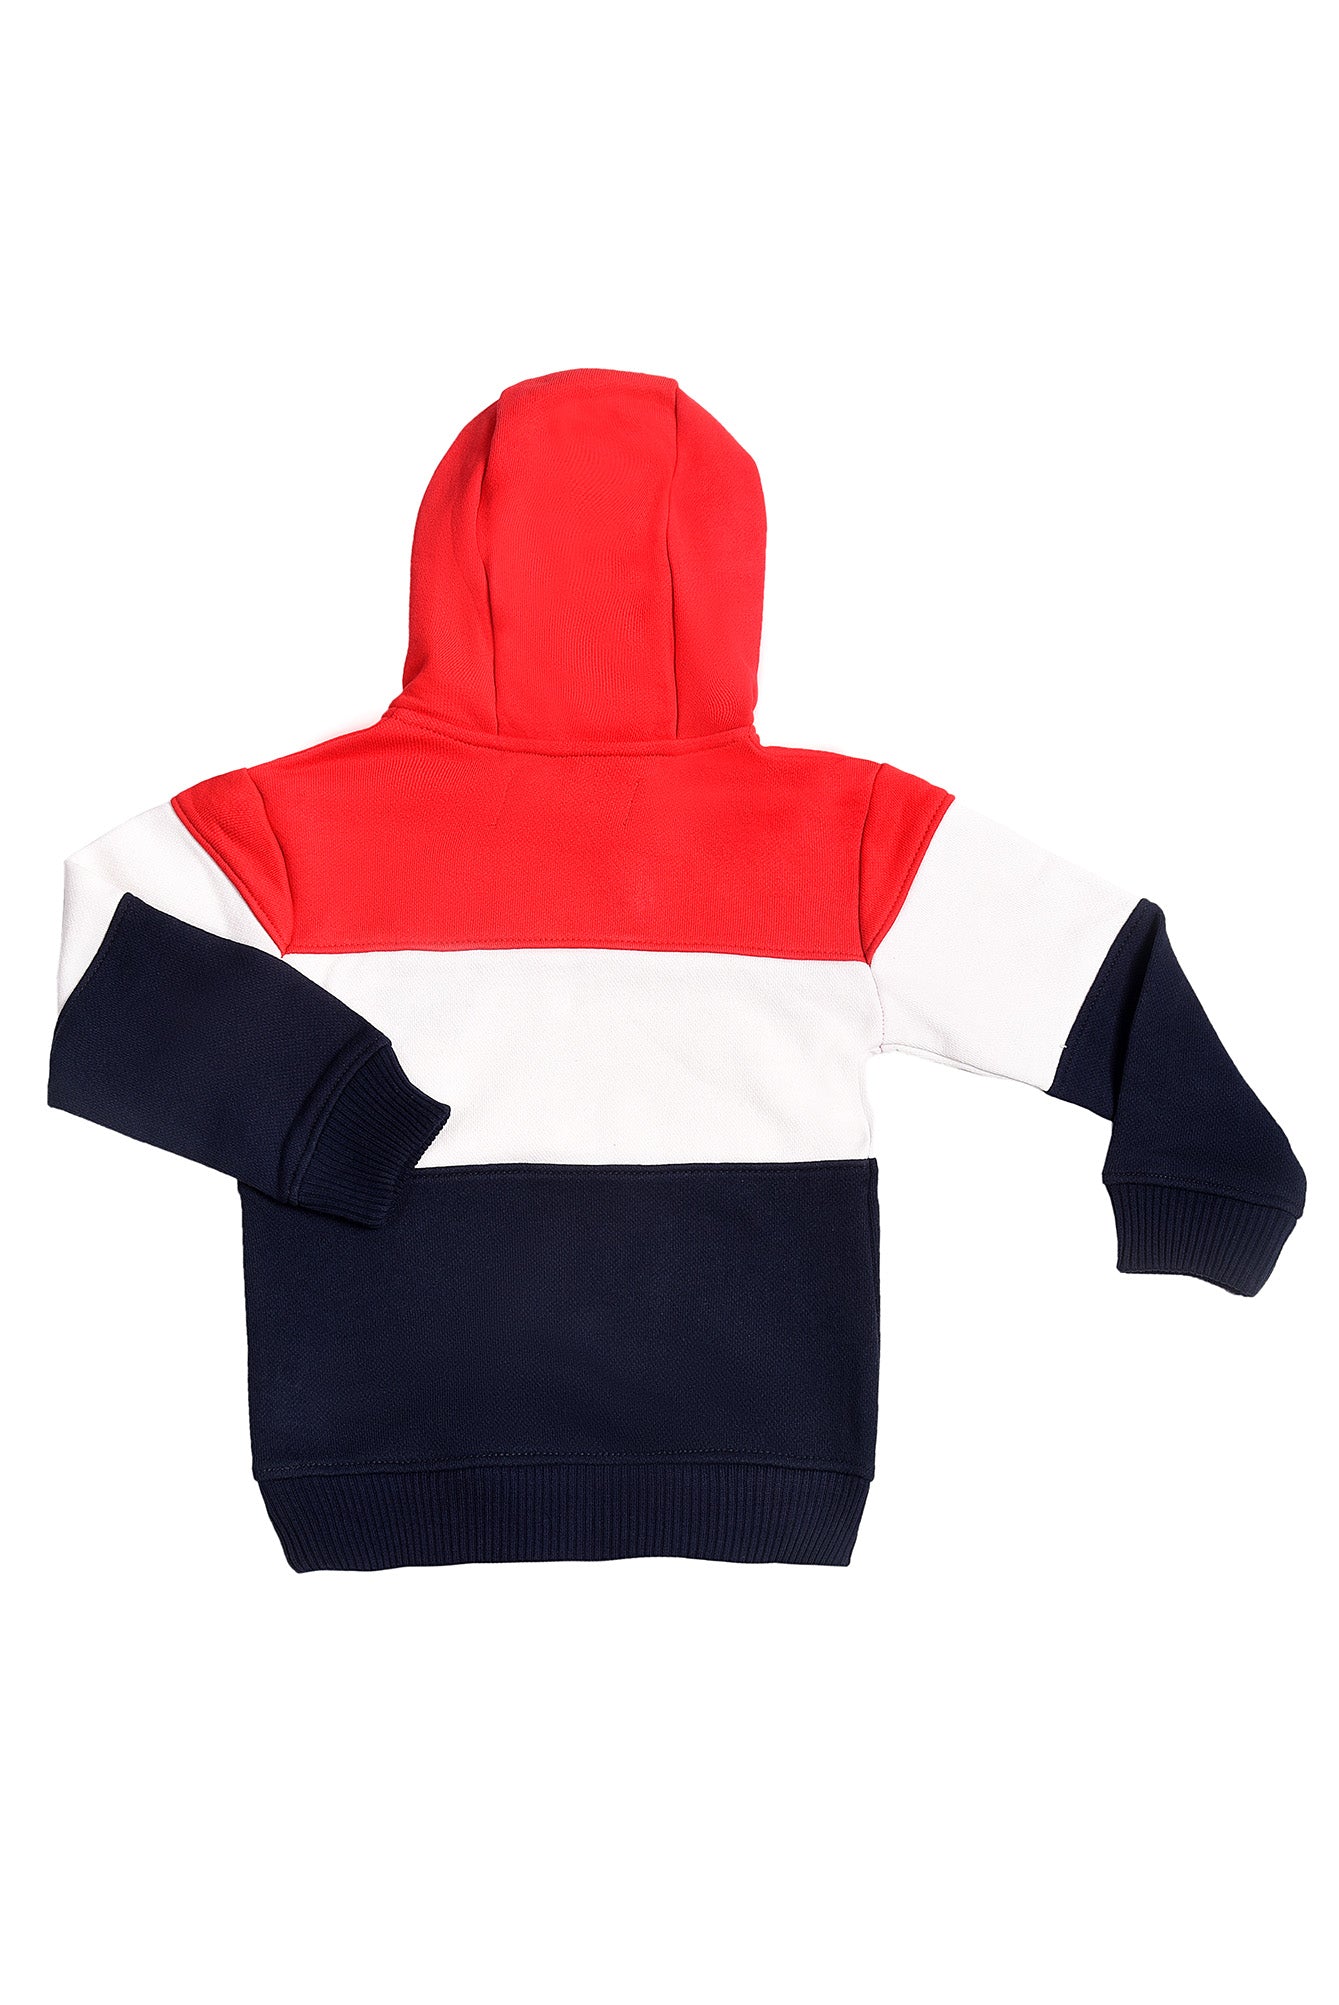 KDS-BC-13159 PULL OVER HOODIE RED STRIPES